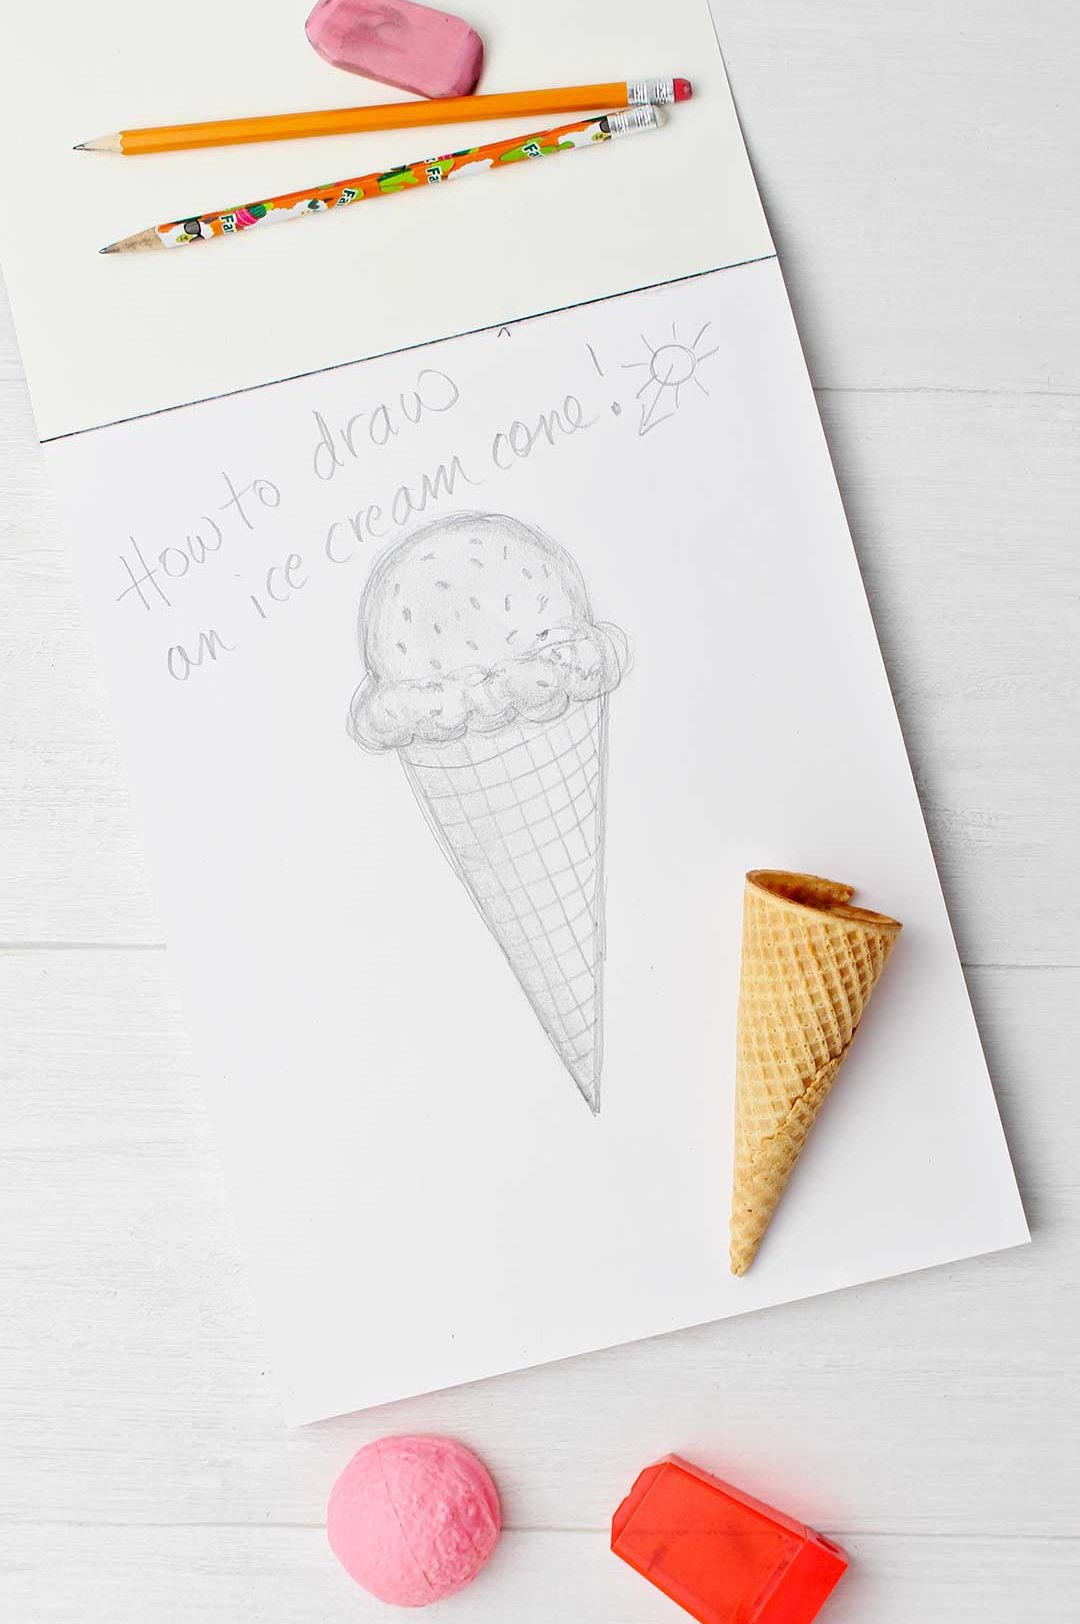 89 Ice Cream Empty Cone Drawing High Res Illustrations - Getty Images